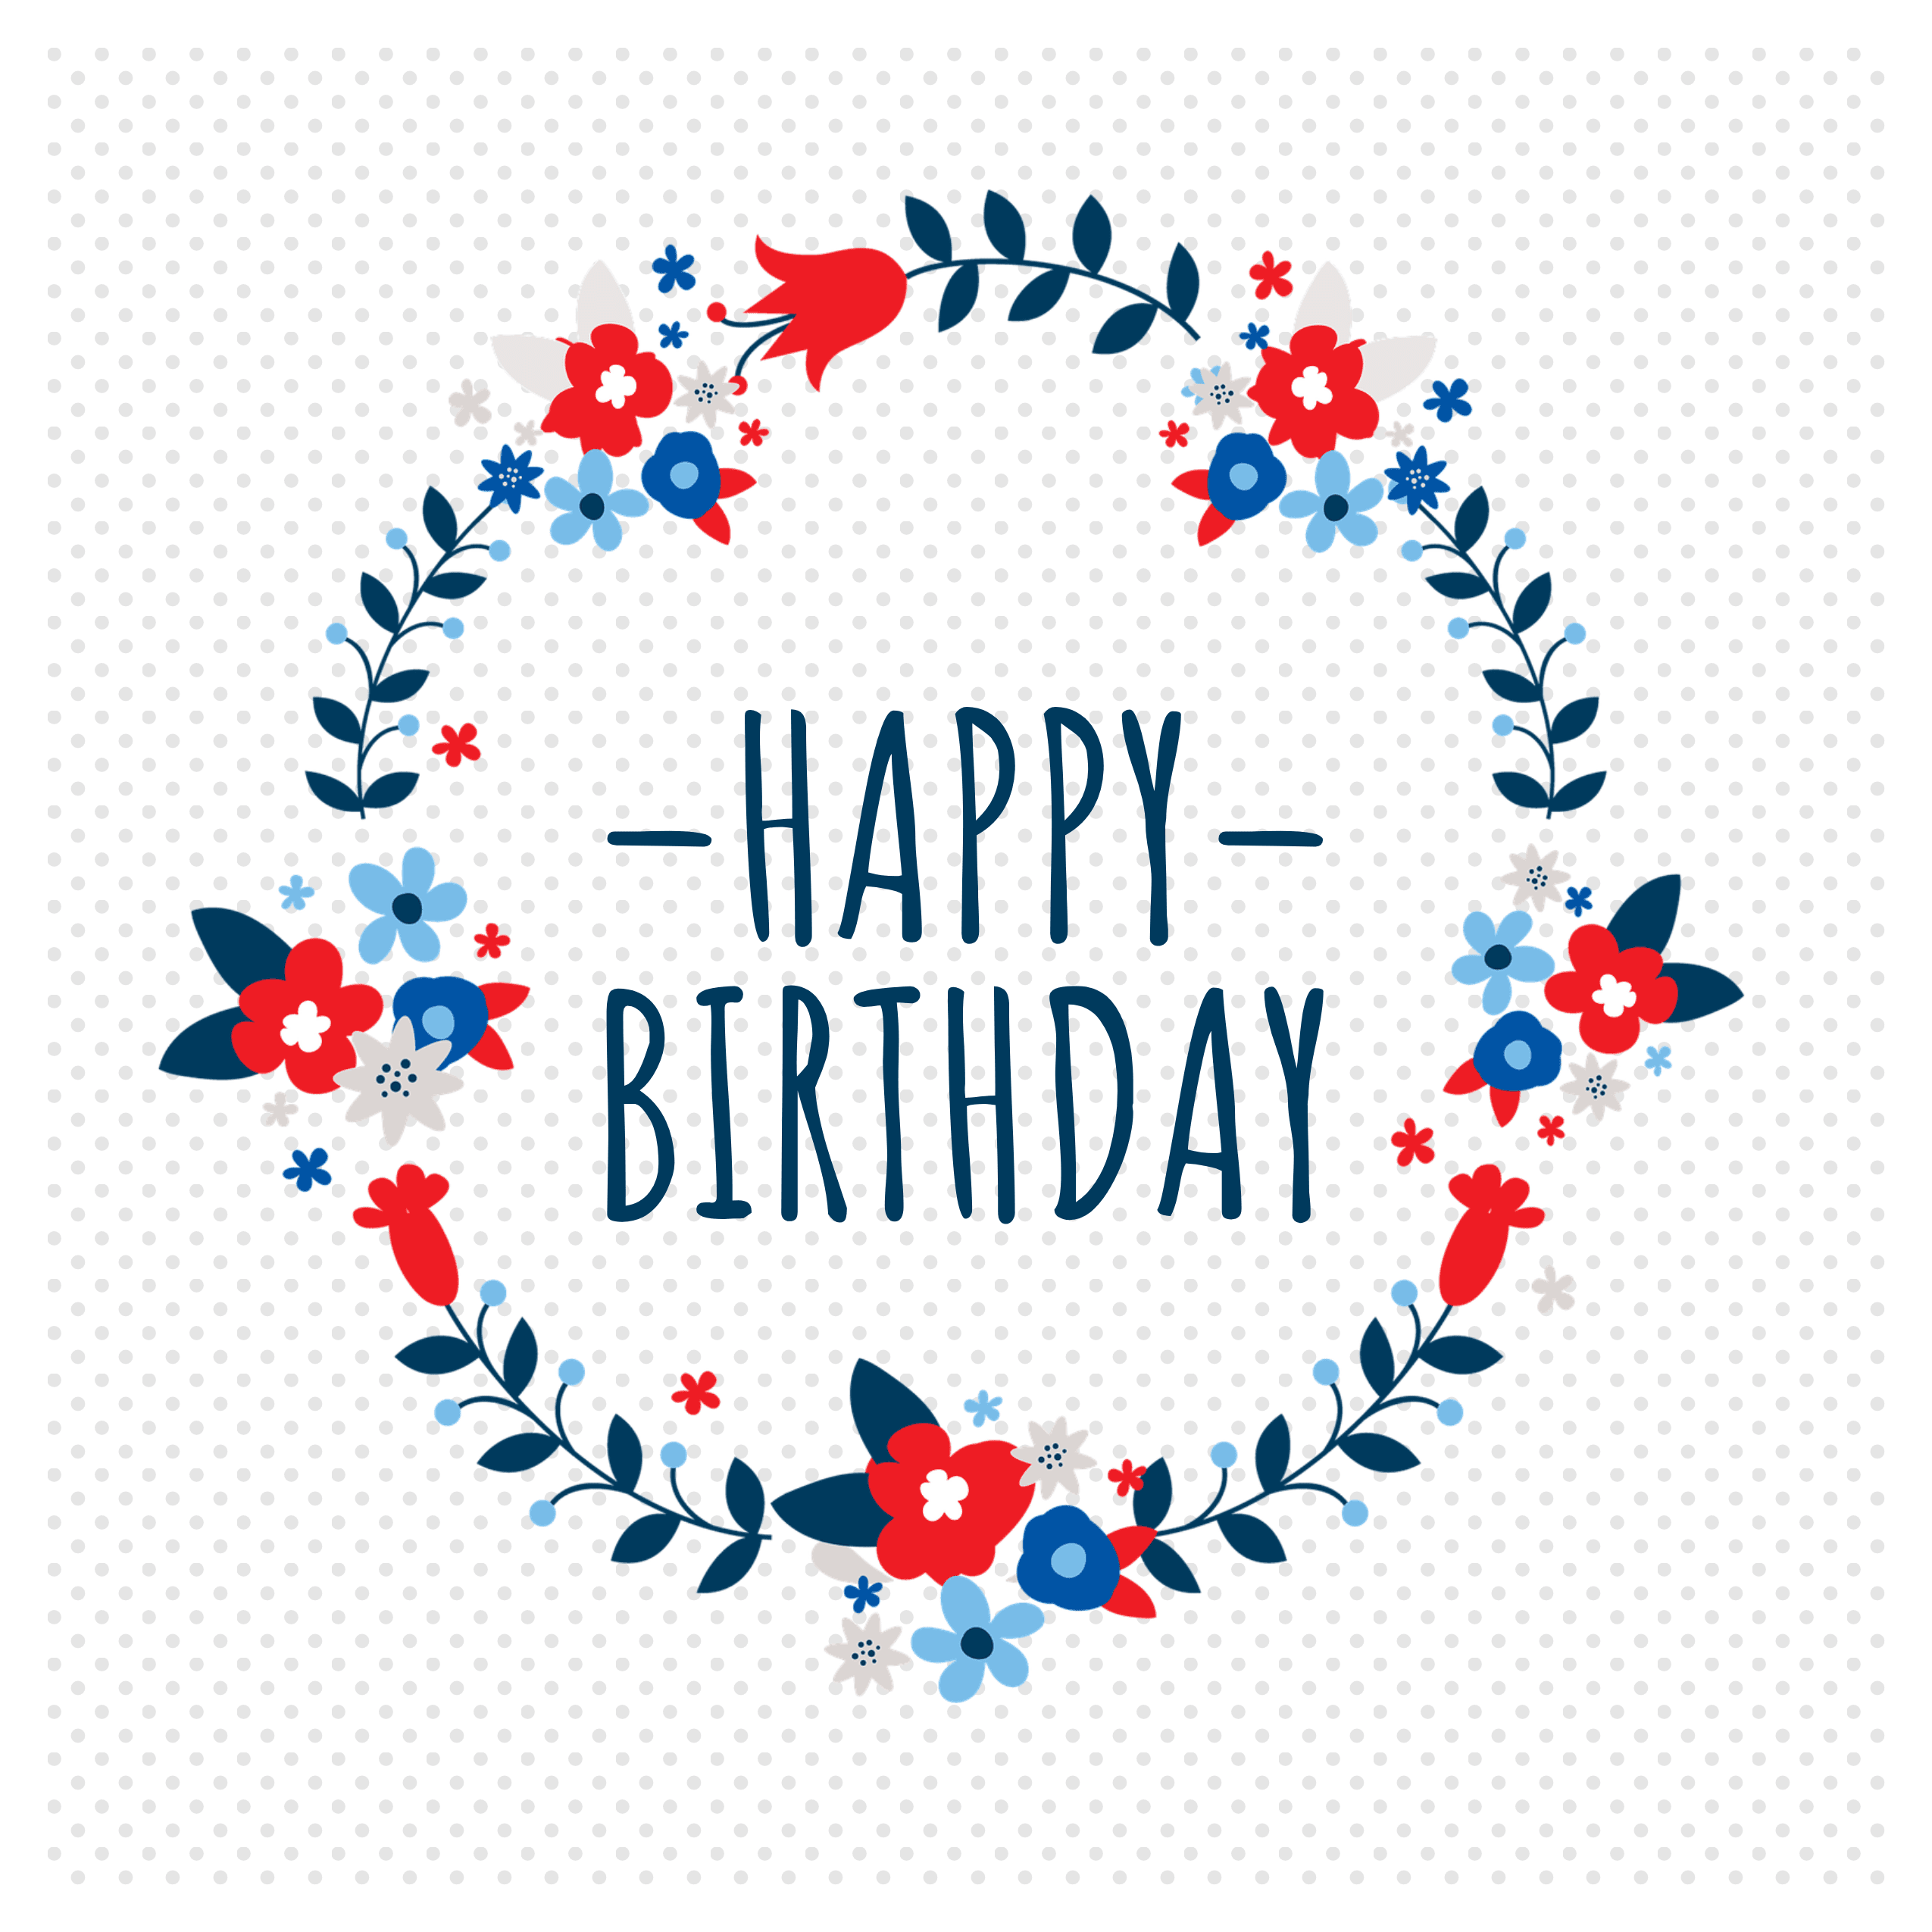 Join us for lunch today at the Helena Senior Center and celebrate this month's birthdays!